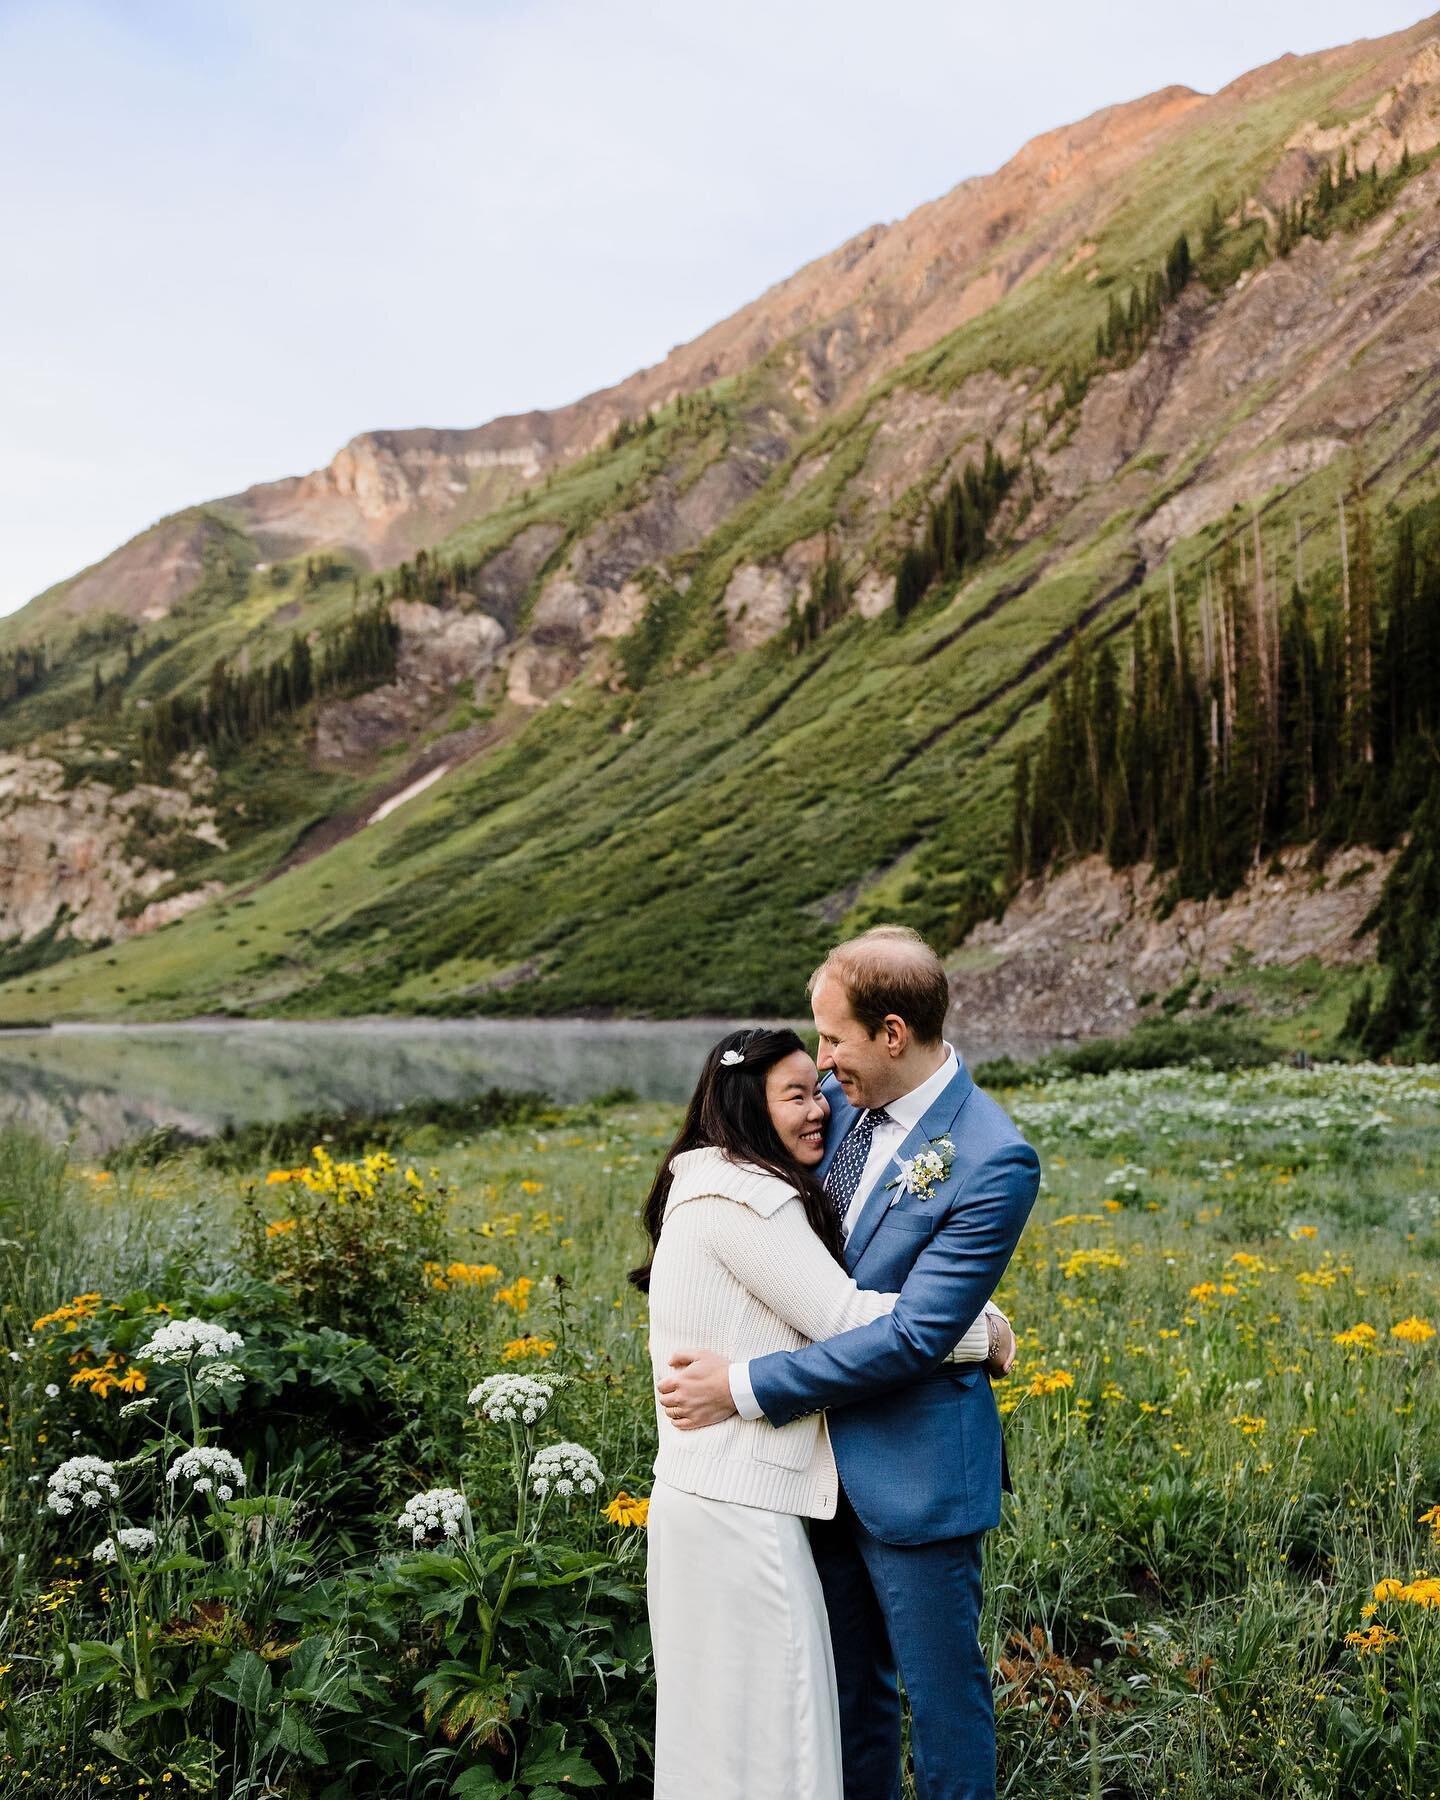 &ldquo;I feel like we&rsquo;re in the flower field from Wizard of Oz&rdquo;

Whenever a couple tells us that they dream of eloping while surrounded by wildflowers, we always insist that they elope in Crested Butte. While you can find gorgeous wildflo